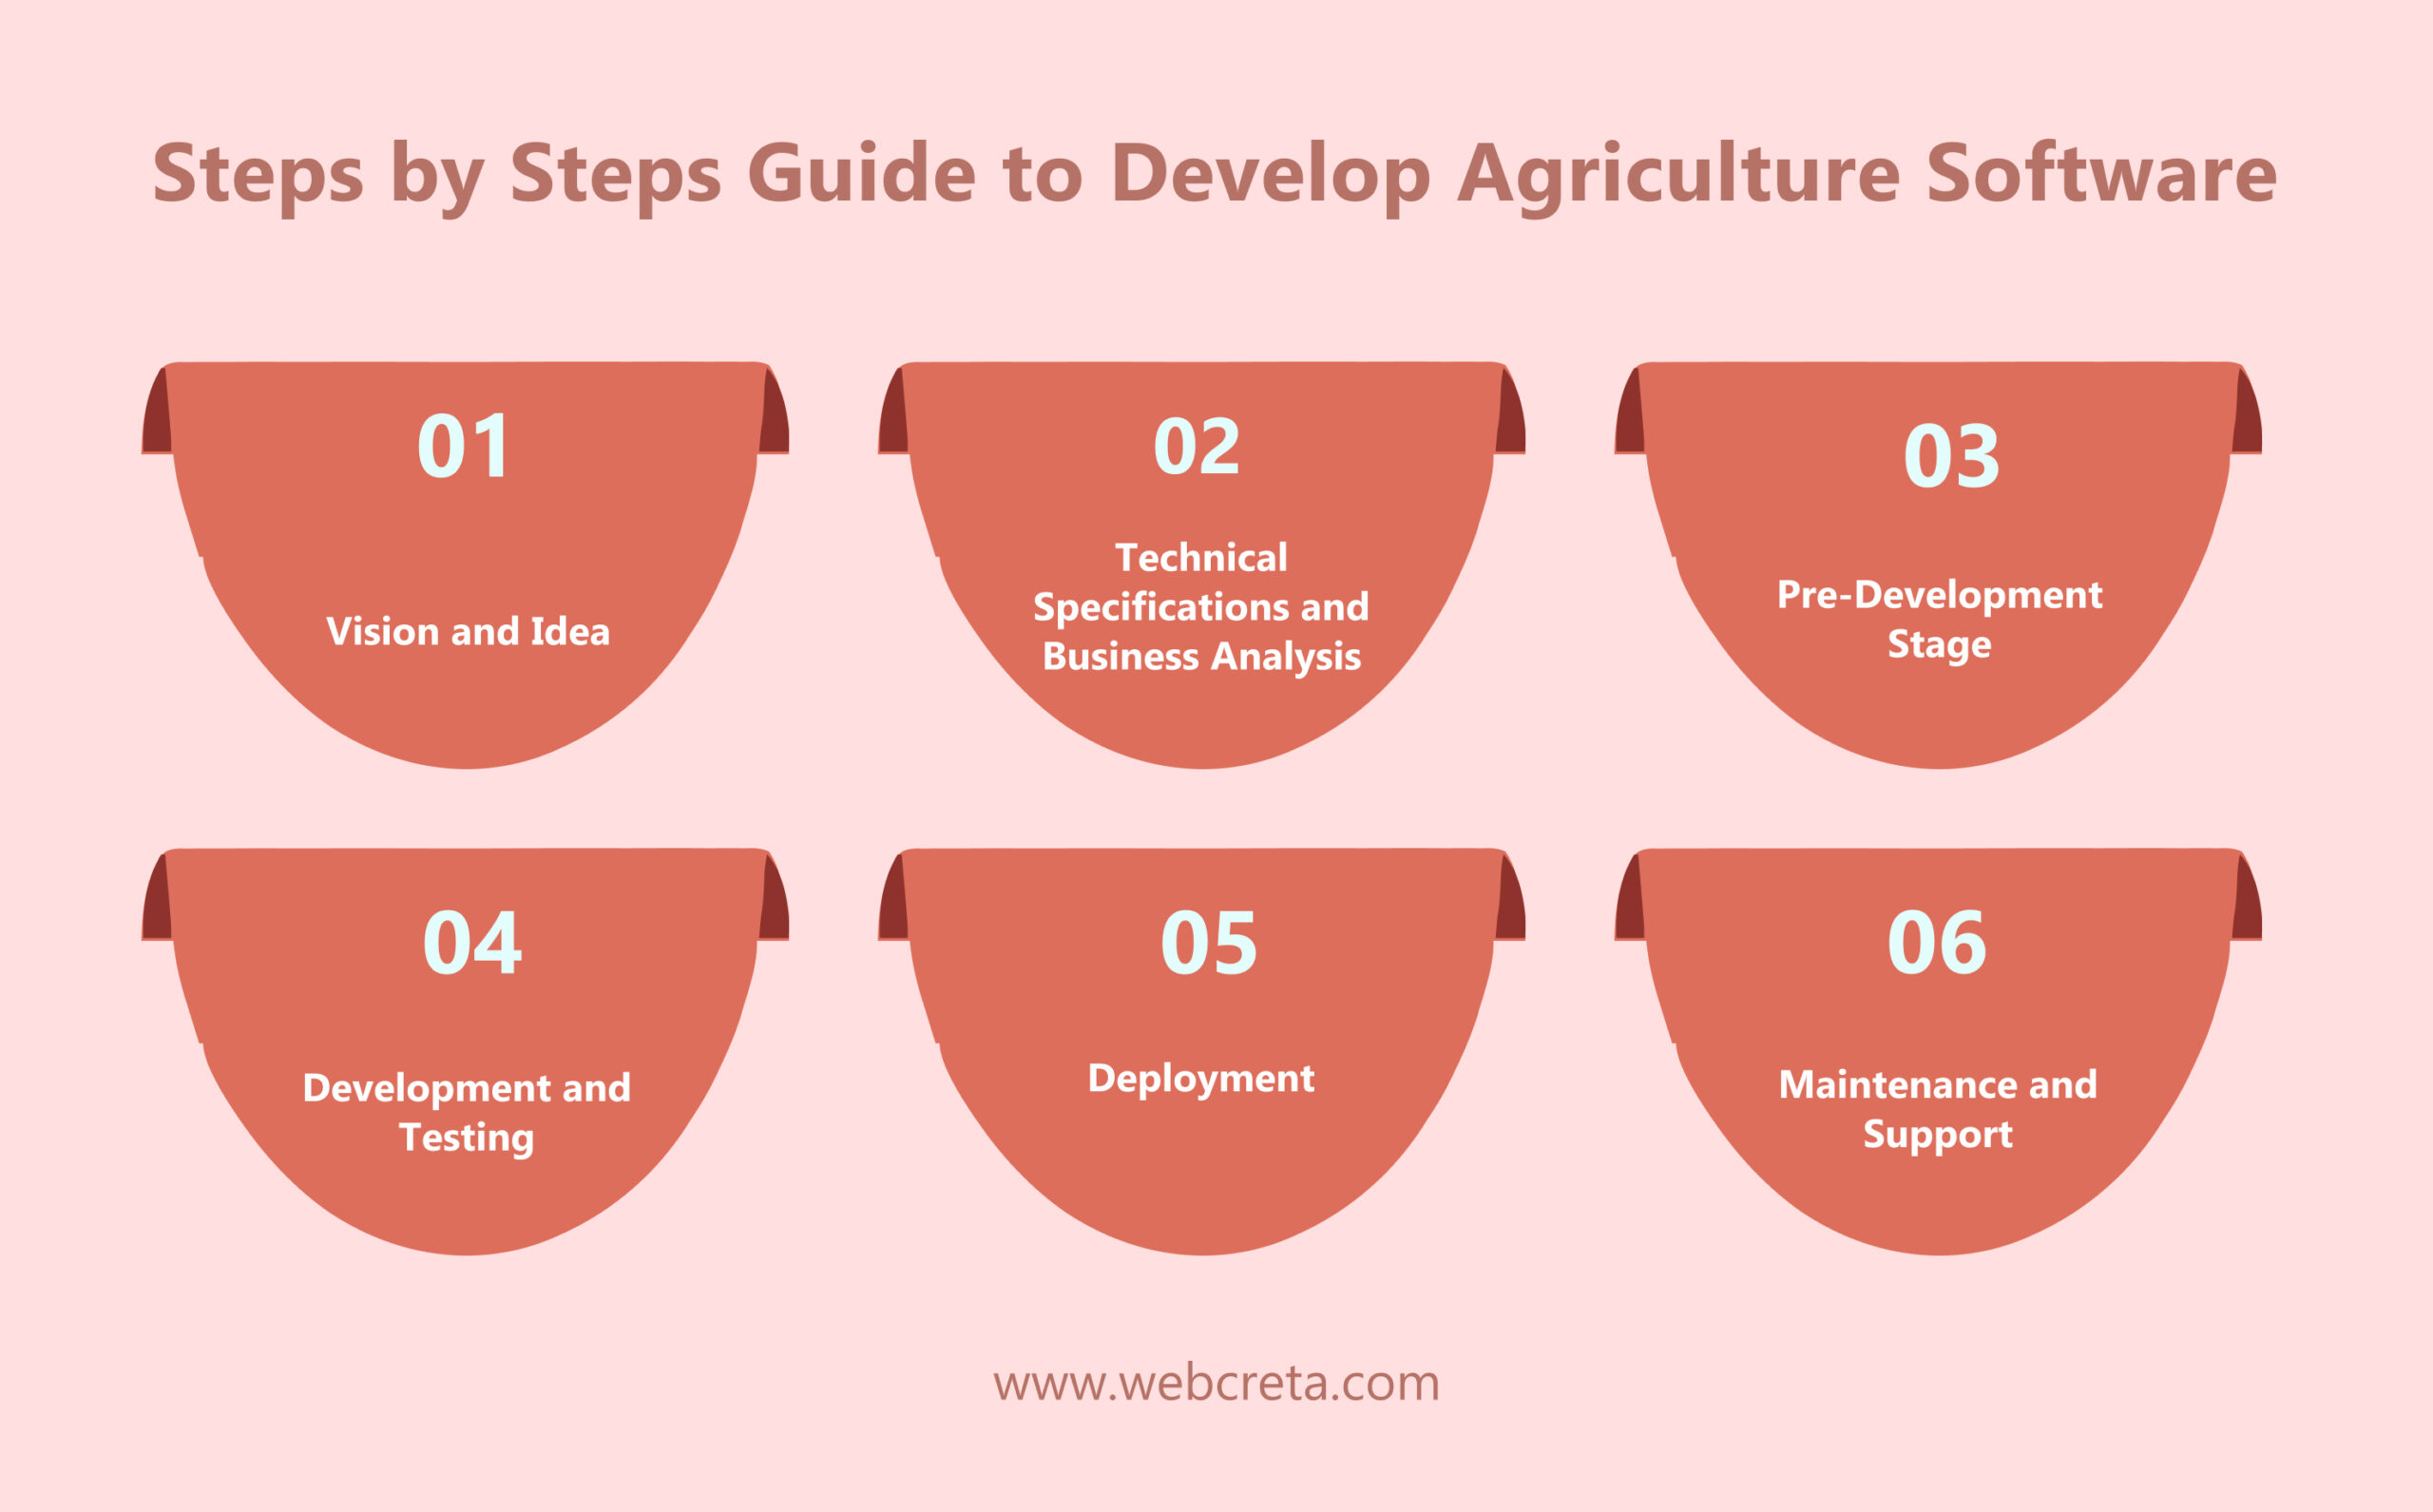 Steps by Steps Guide to Develop Agriculture Software